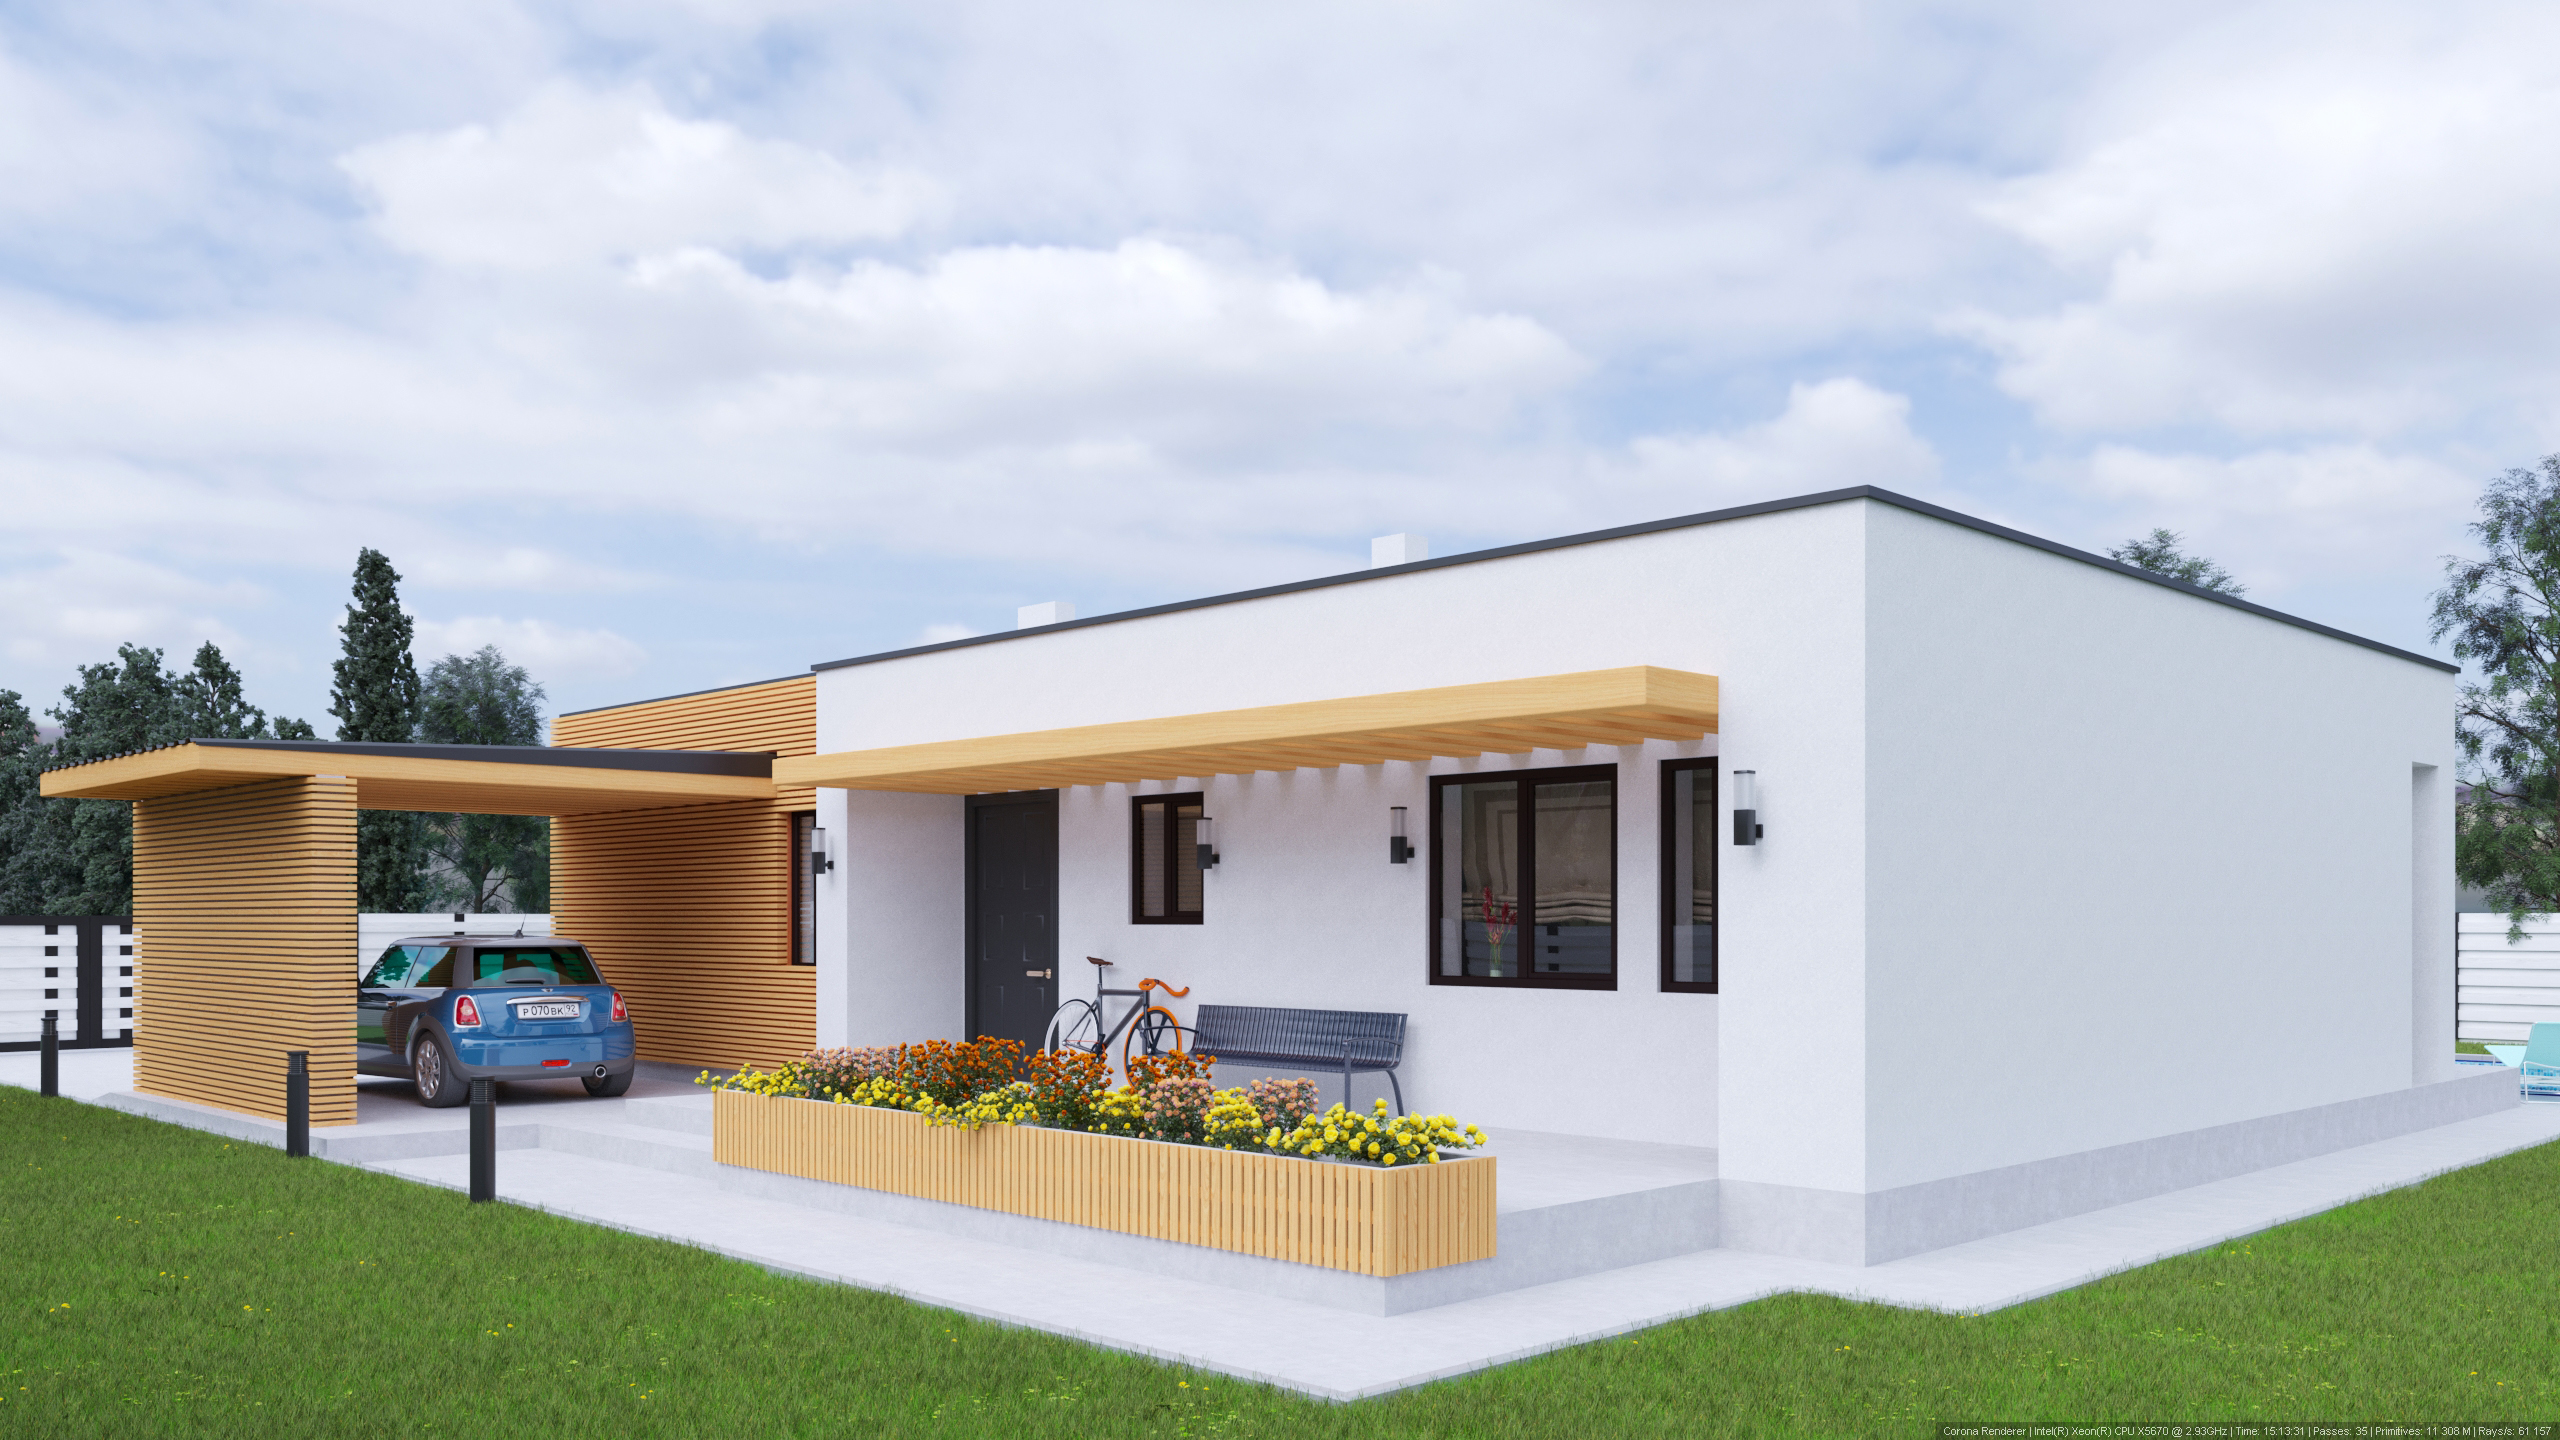 House on the plot V2 in 3d max corona render image